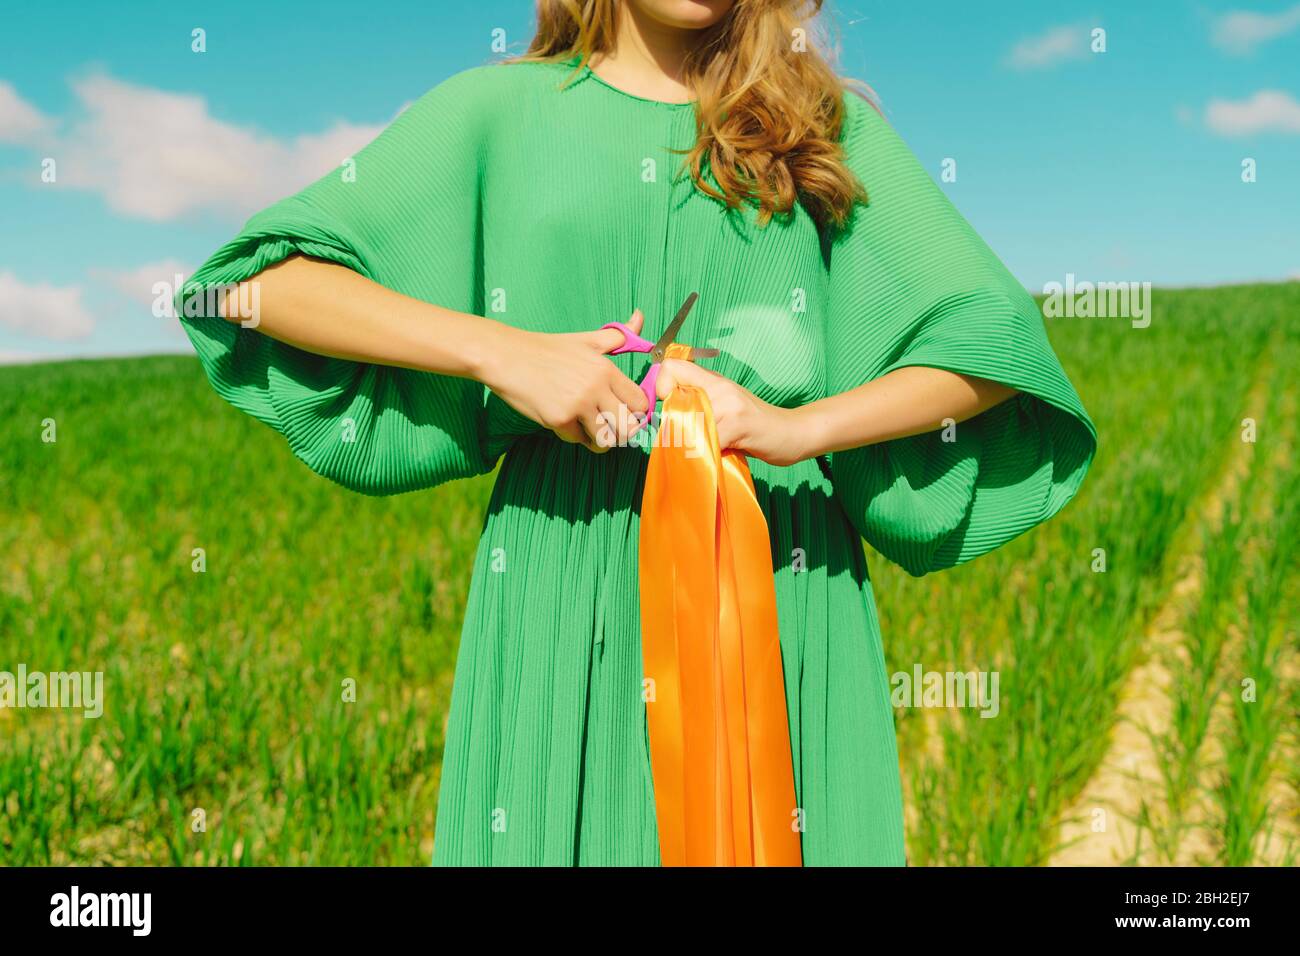 Mid section of woman wearing a green dress standing in a field cutting a ribbon Stock Photo